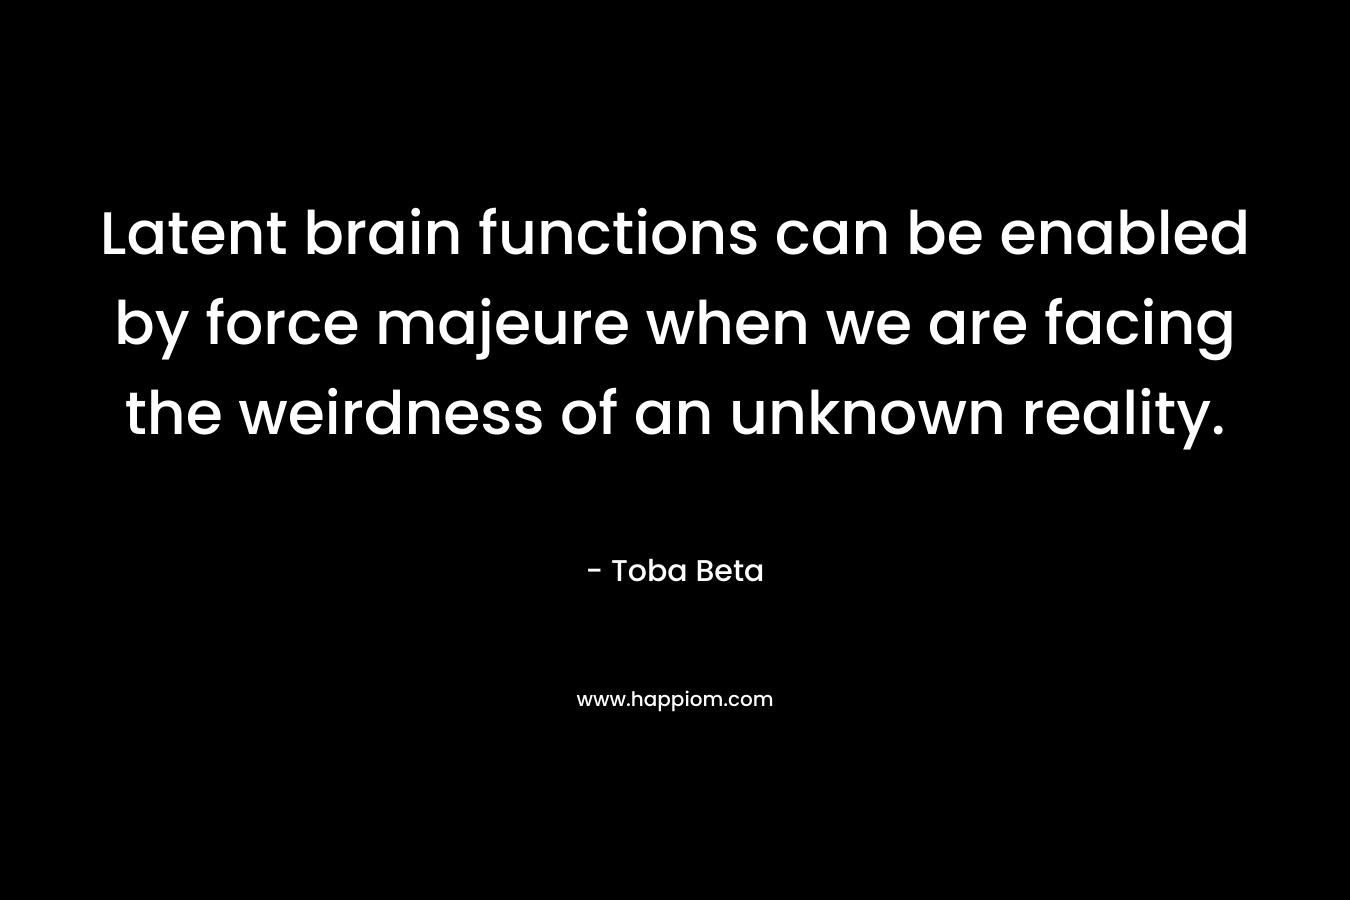 Latent brain functions can be enabled by force majeure when we are facing the weirdness of an unknown reality. – Toba Beta